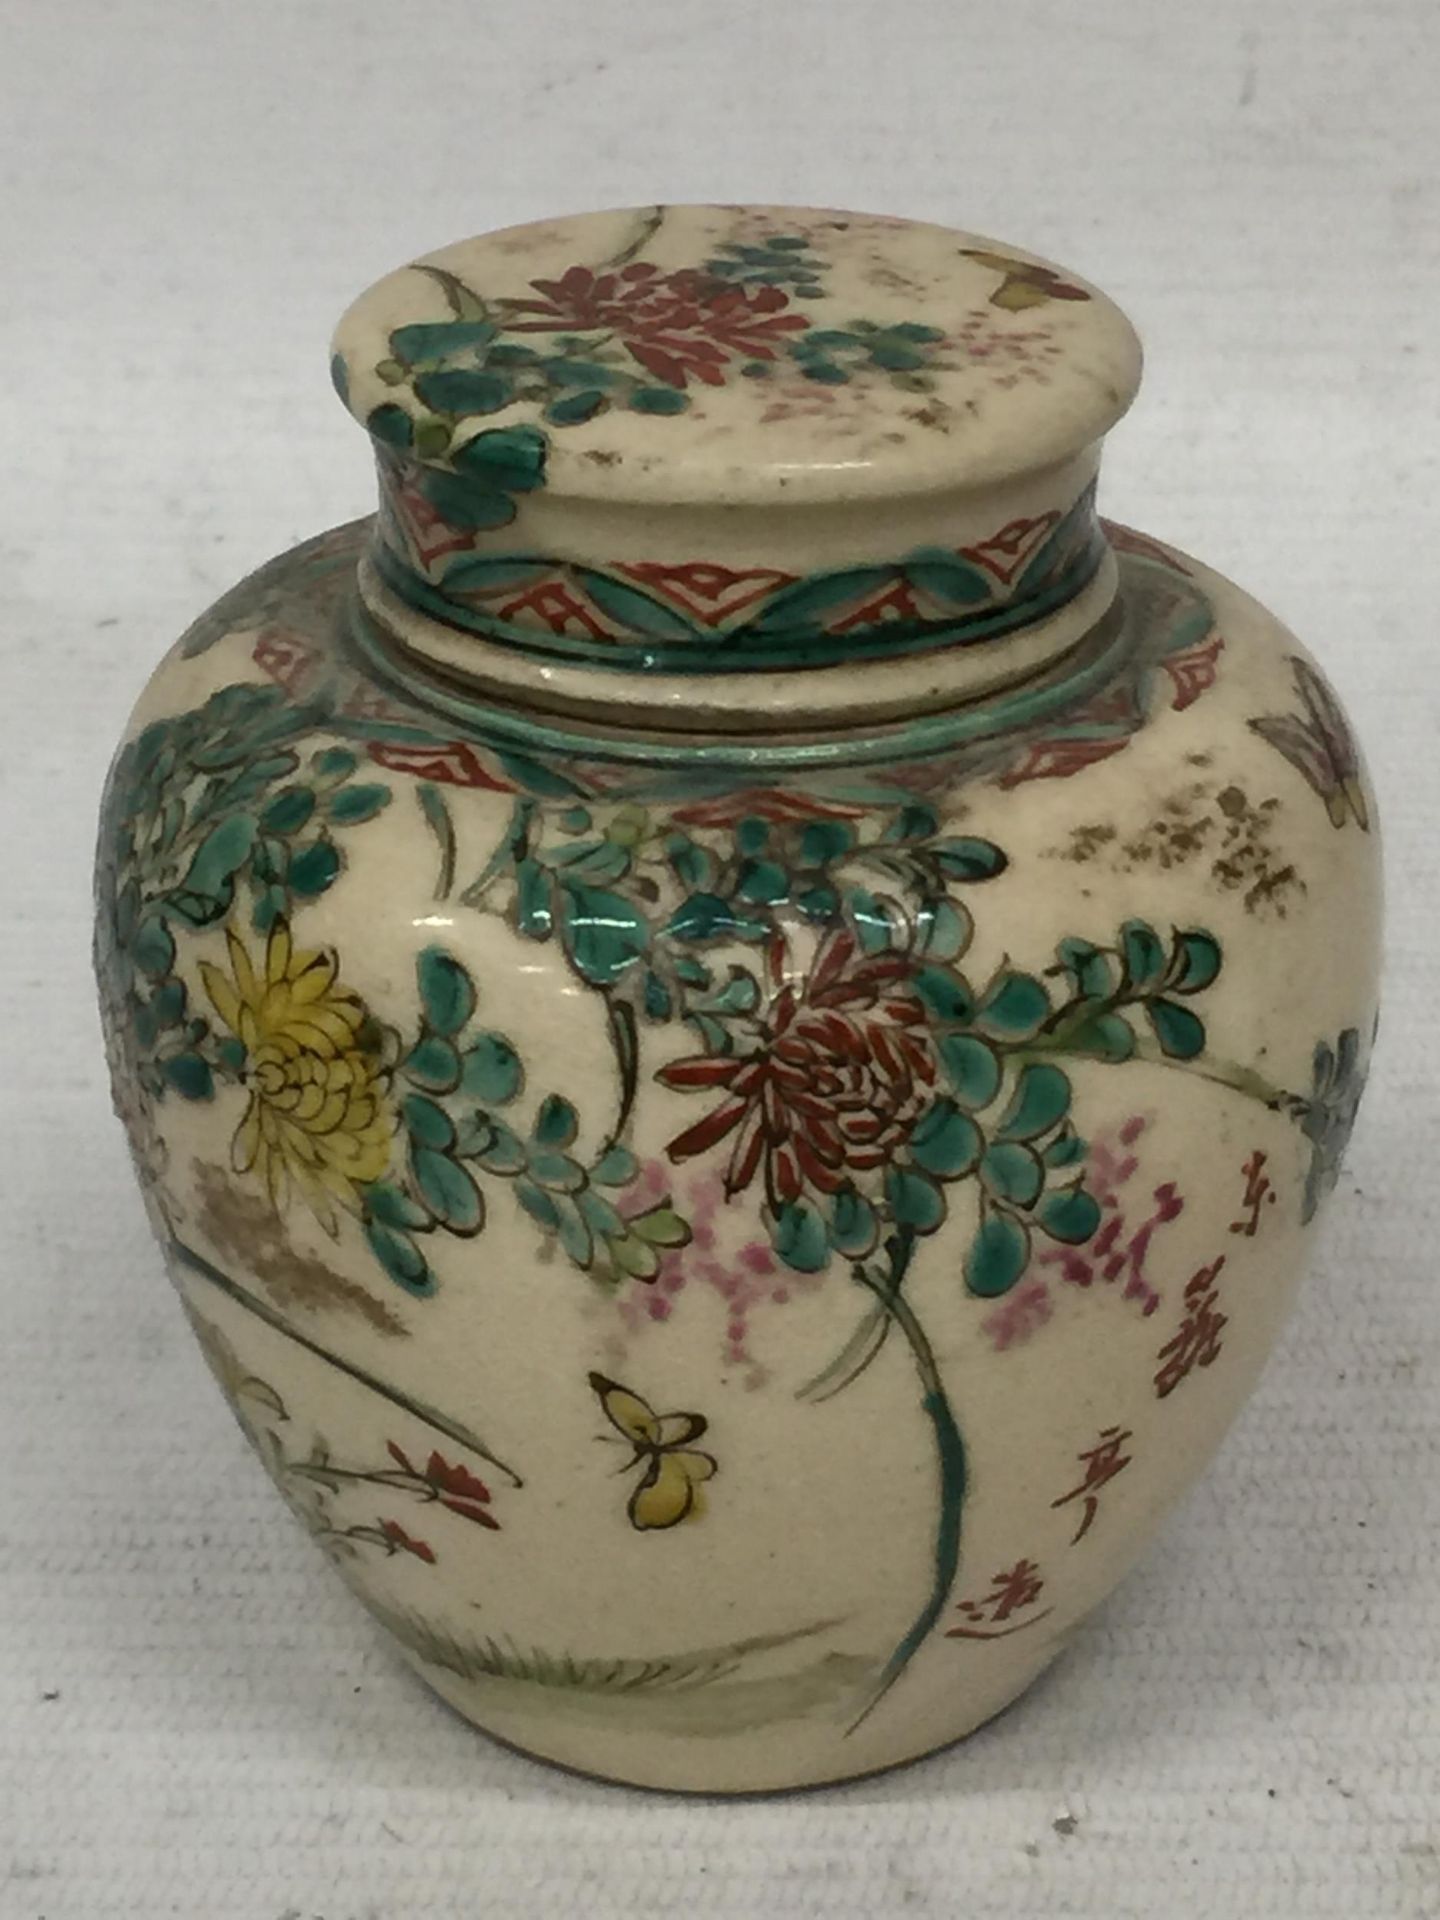 A JAPANESE STONEWARE LIDDED SMALL POT POURRI / GINGER JAR WITH BIRD AND FLORAL DESIGN AND INNDER LID - Image 2 of 7